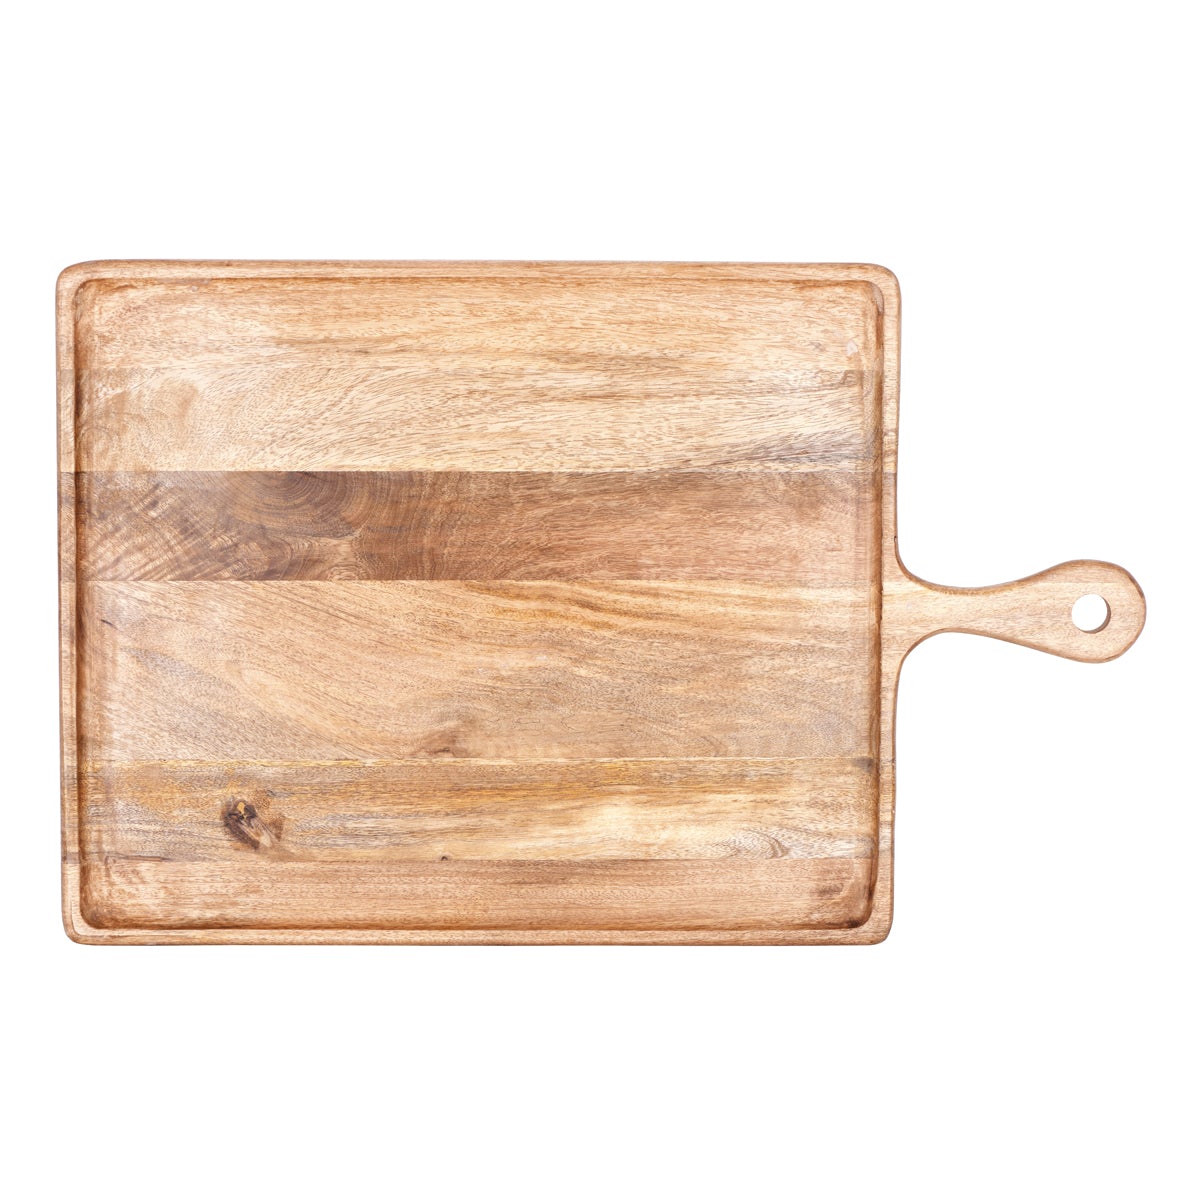 '04922 Chef Inox Mangowood Rectangular Serving Board with Handle Natural 520x440x20mm Tomkin Australia Hospitality Supplies